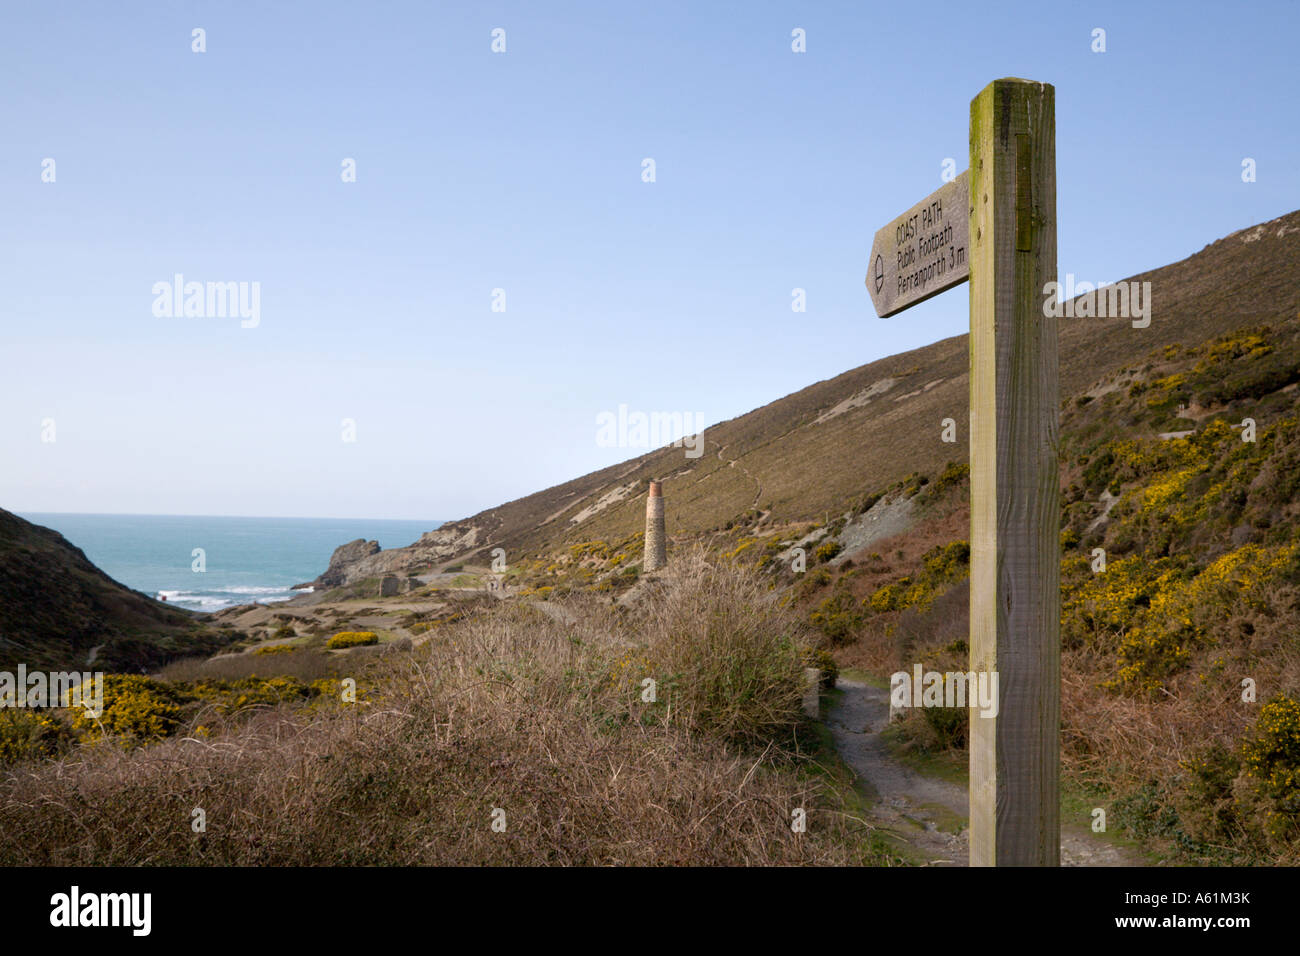 Signpost pointing to Cornish Tin mine remains at Trevallas Coombe Stock Photo